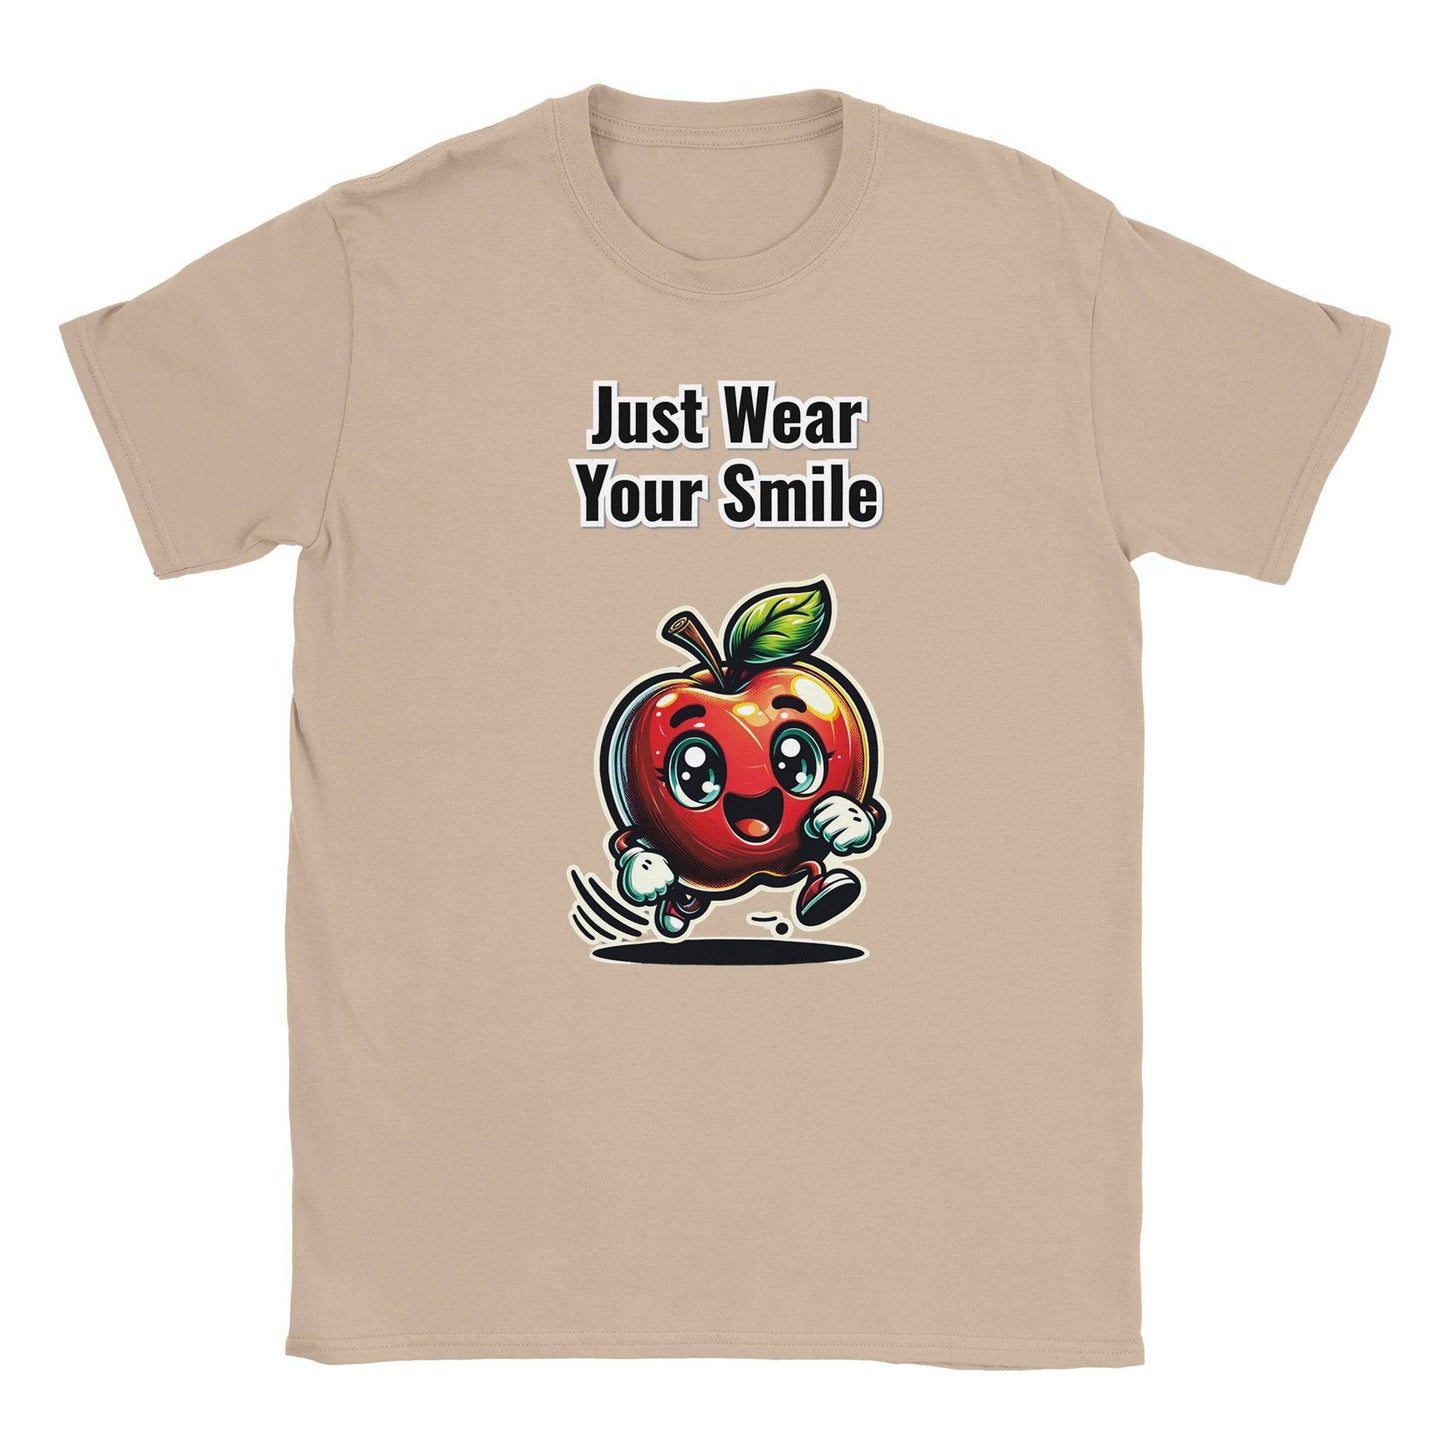 just Wear your smile T-shirt - 100% soft, breathable cotton - BeinCart